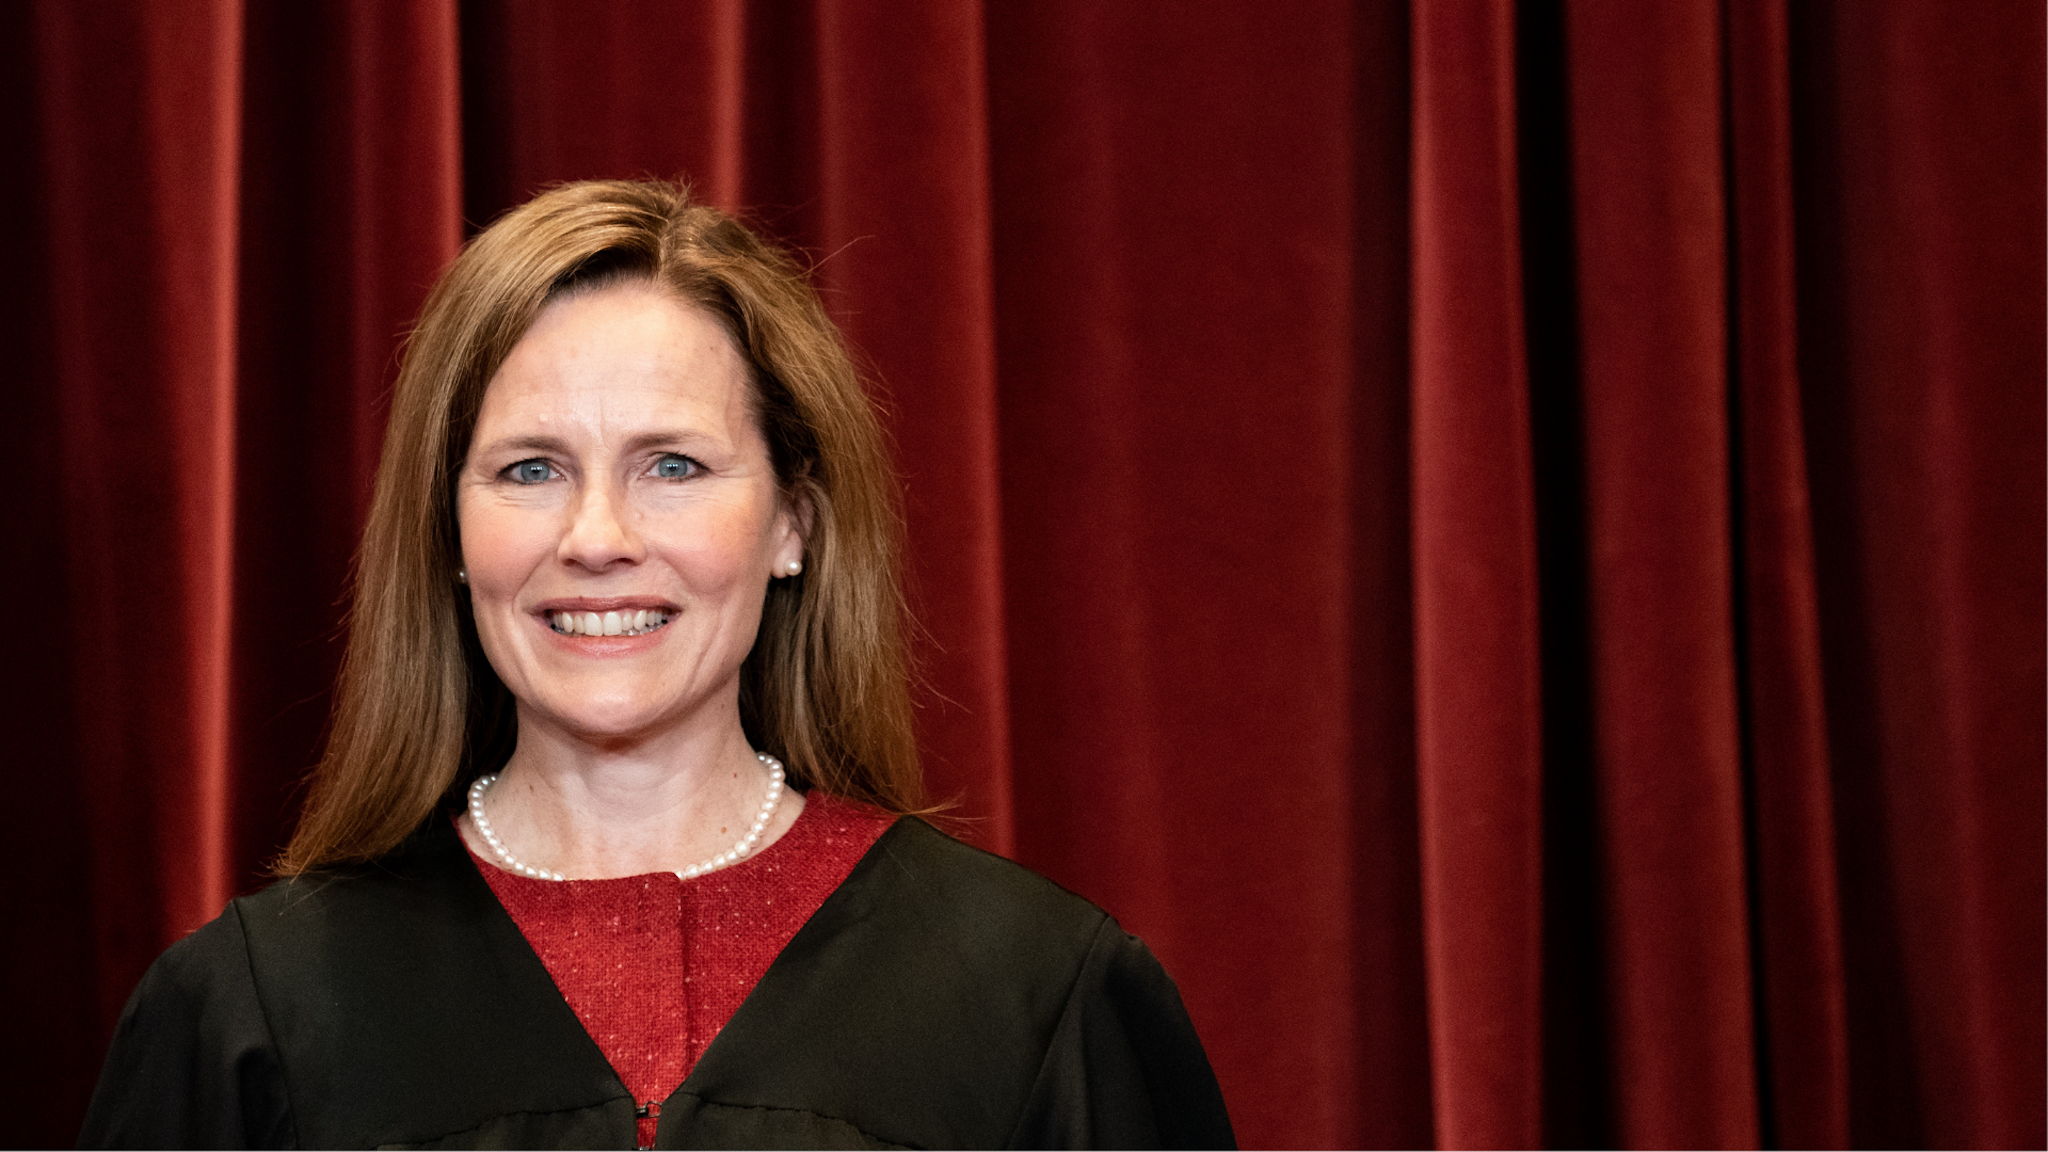 Associate Justice Amy Coney Barrett stands during a group photo of the Justices at the Supreme Court in Washington, DC on April 23, 2021. (